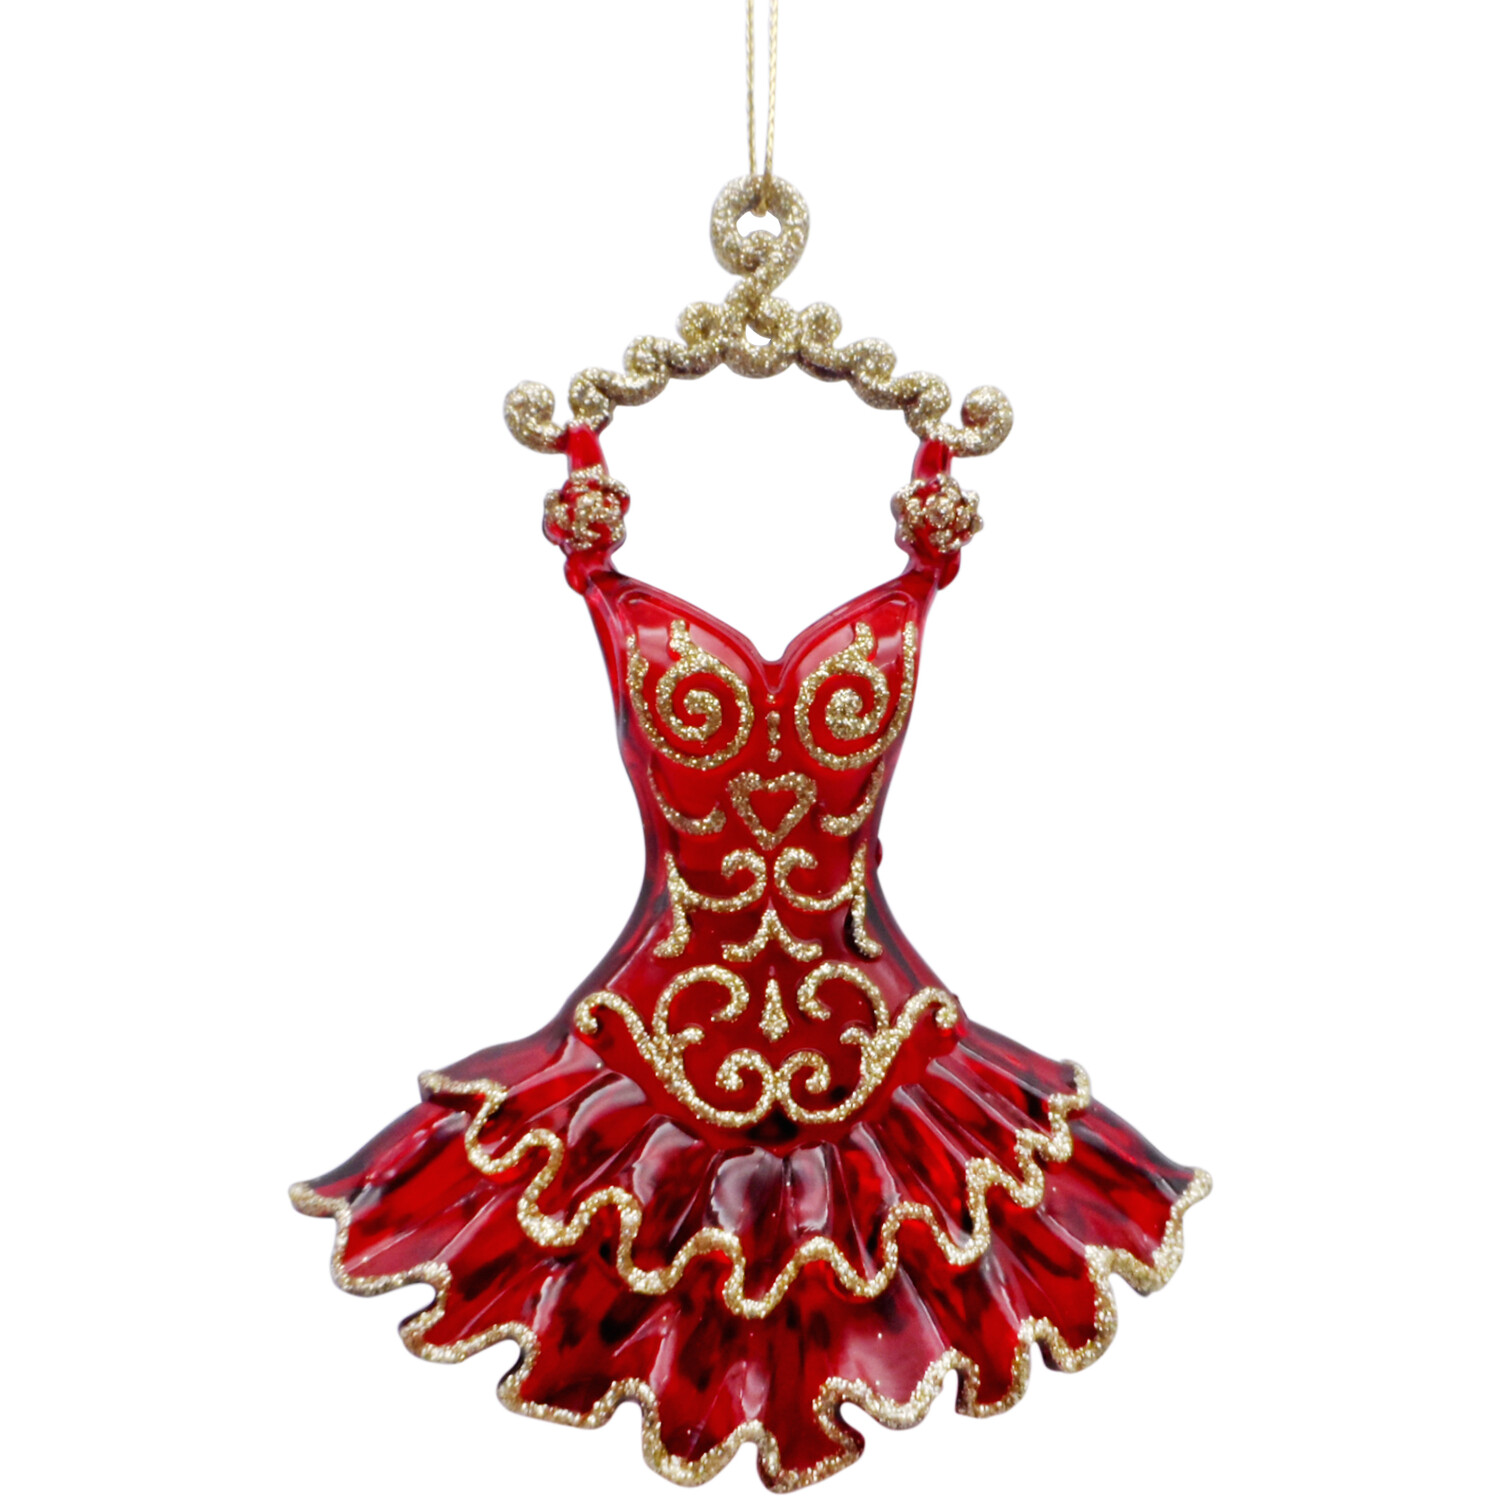 Red Dress Hanging Ornament Image